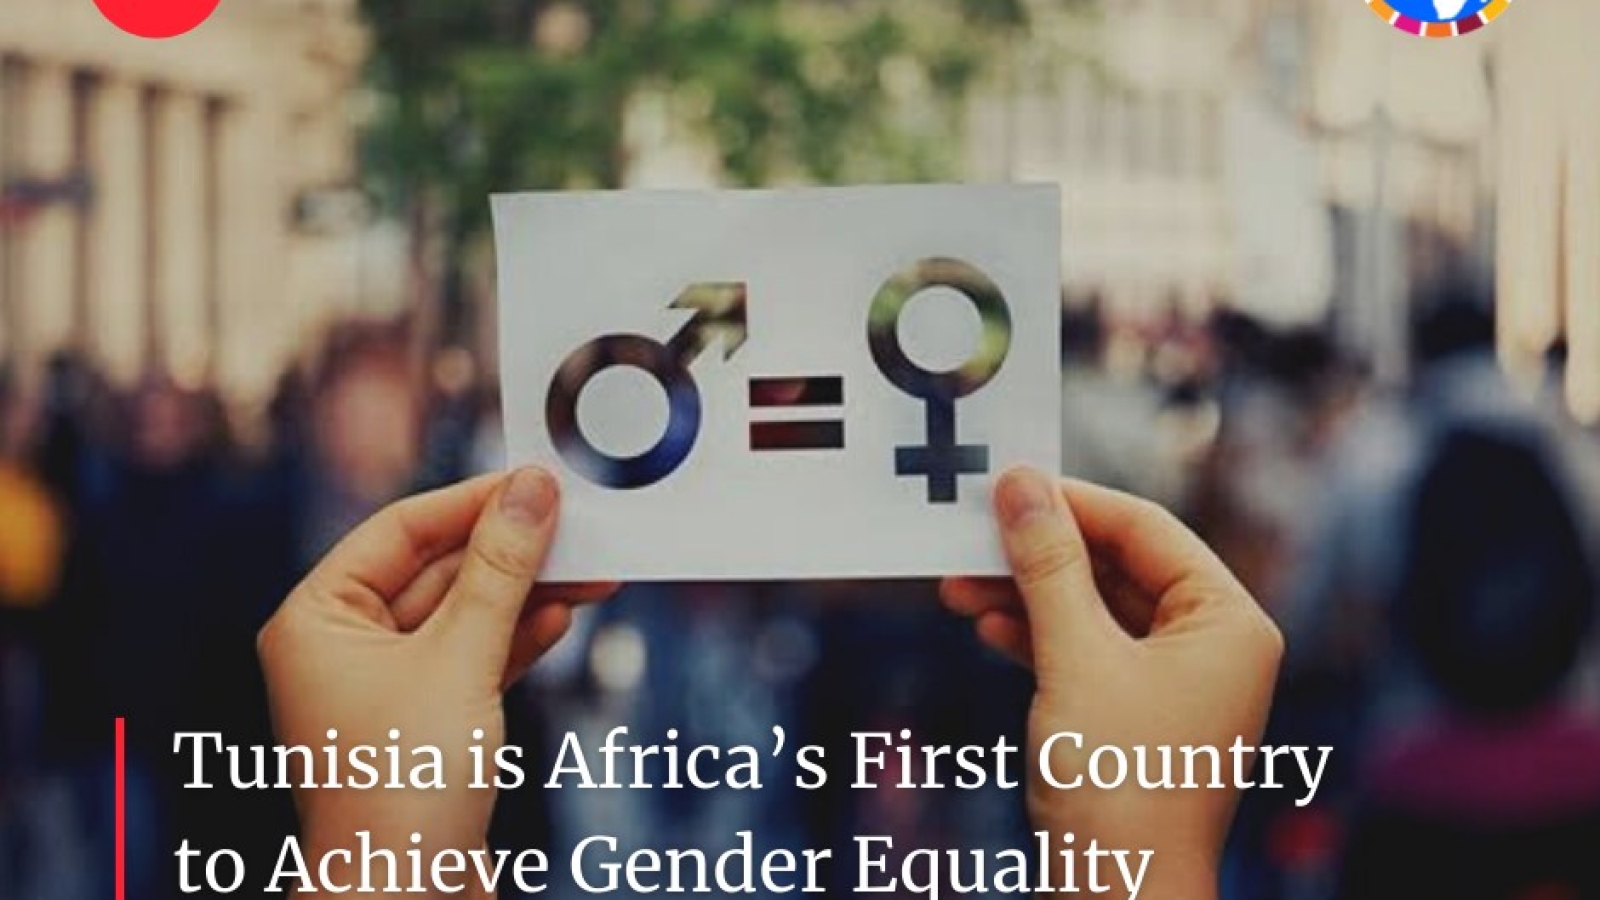 Tunisia is Africa’s First Country to Achieve Gender Equality